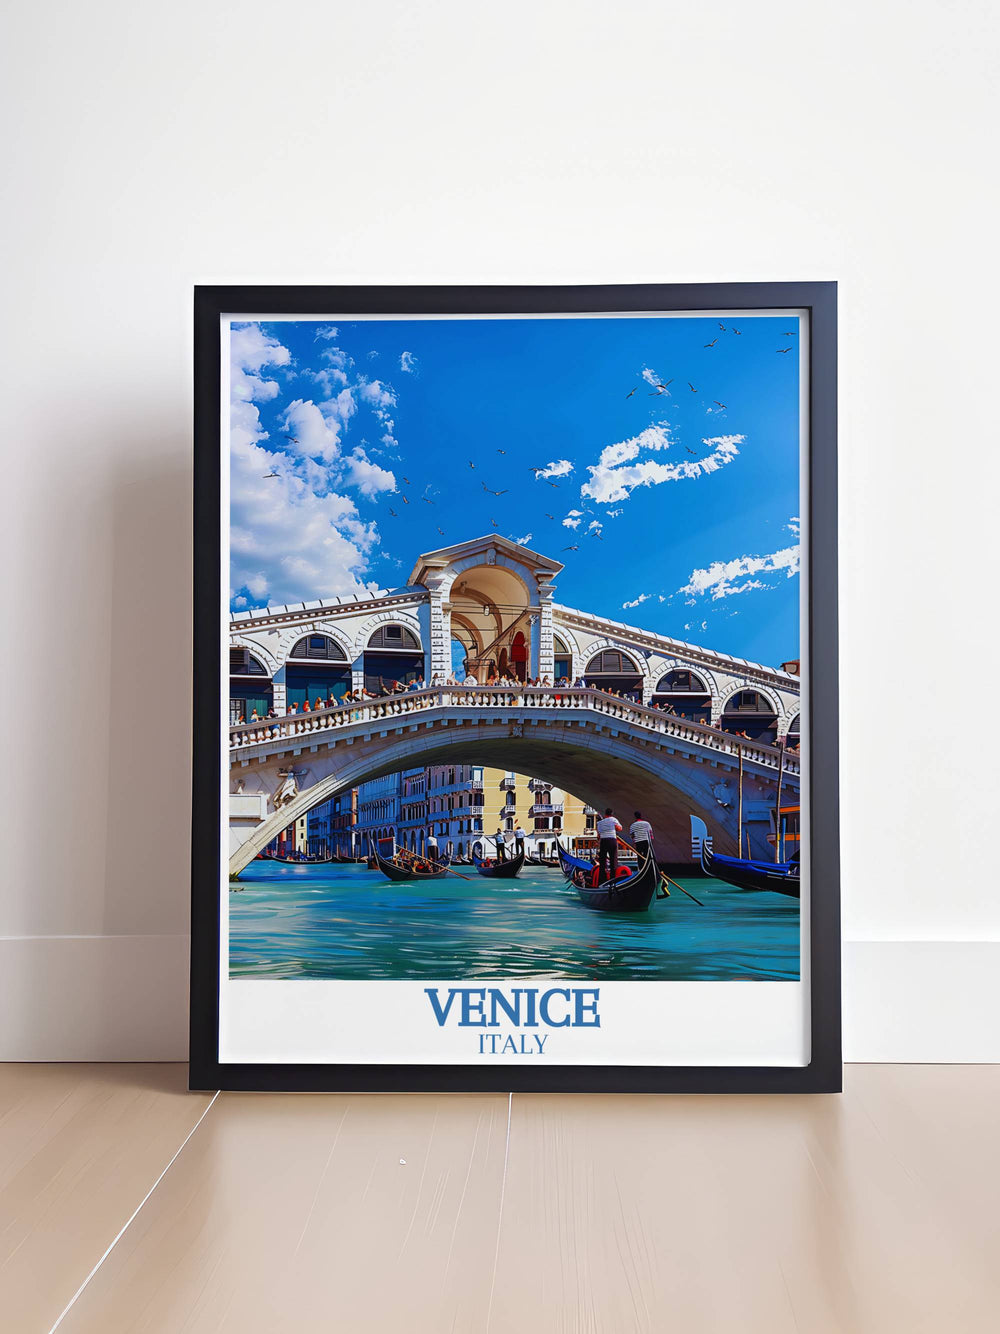 Venice wall art featuring the Grand Canal and its charming gondolas bringing the citys unique atmosphere into your home